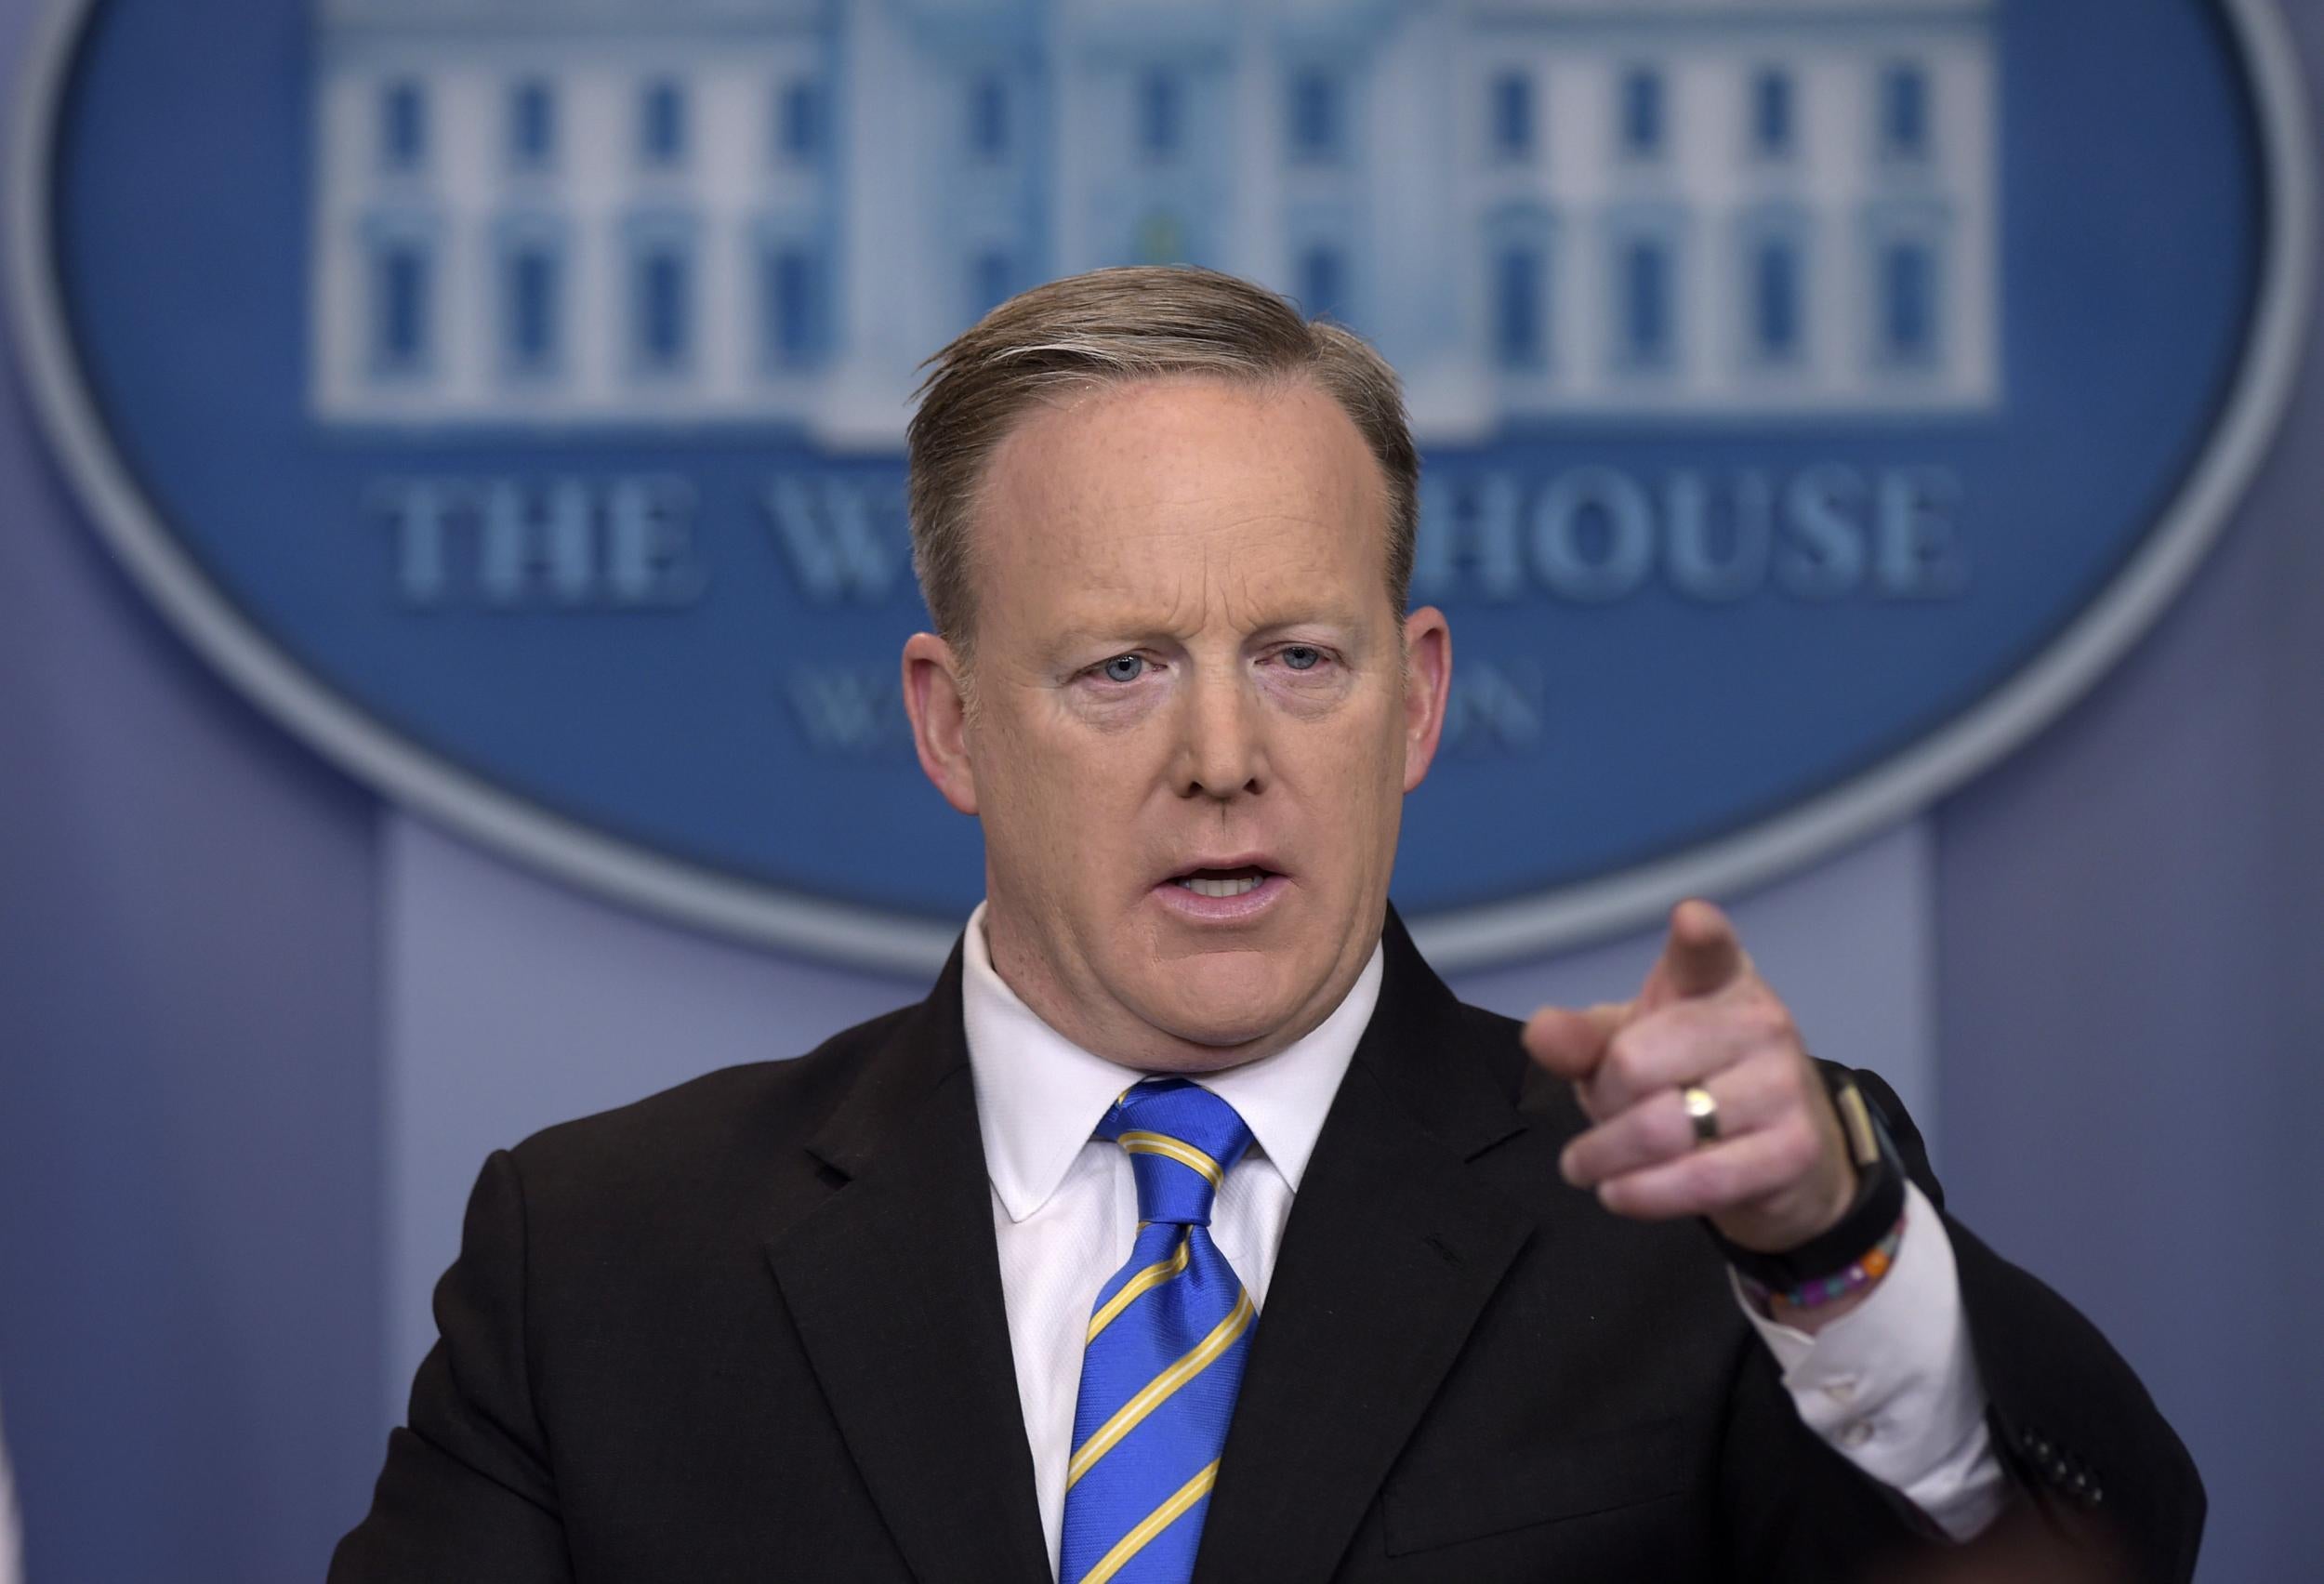 Mr Spicer said Donald Trump stood by his claim, for which there is no evidence